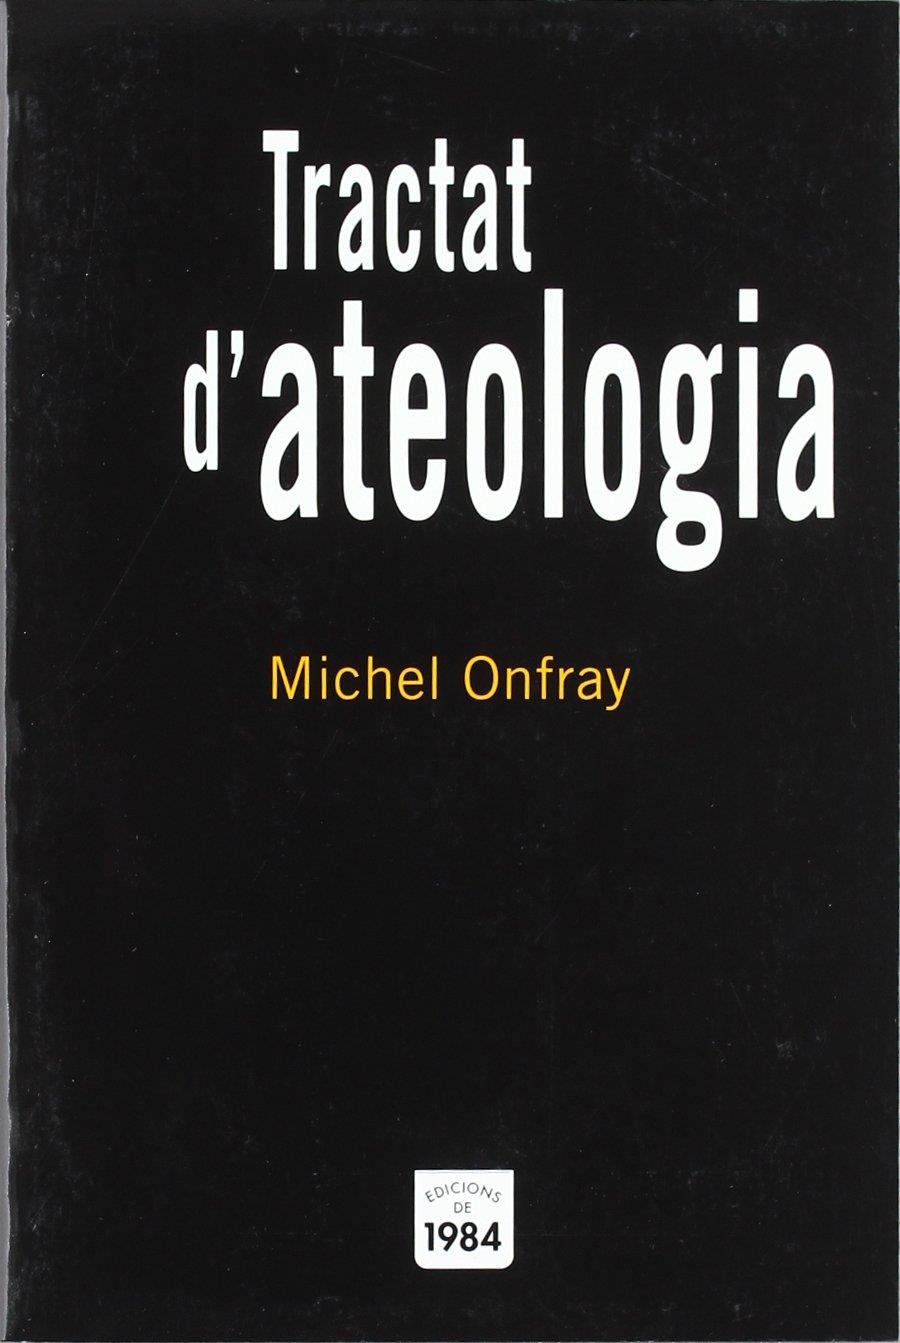 Tractat d'ateologia | Onfray, Michel